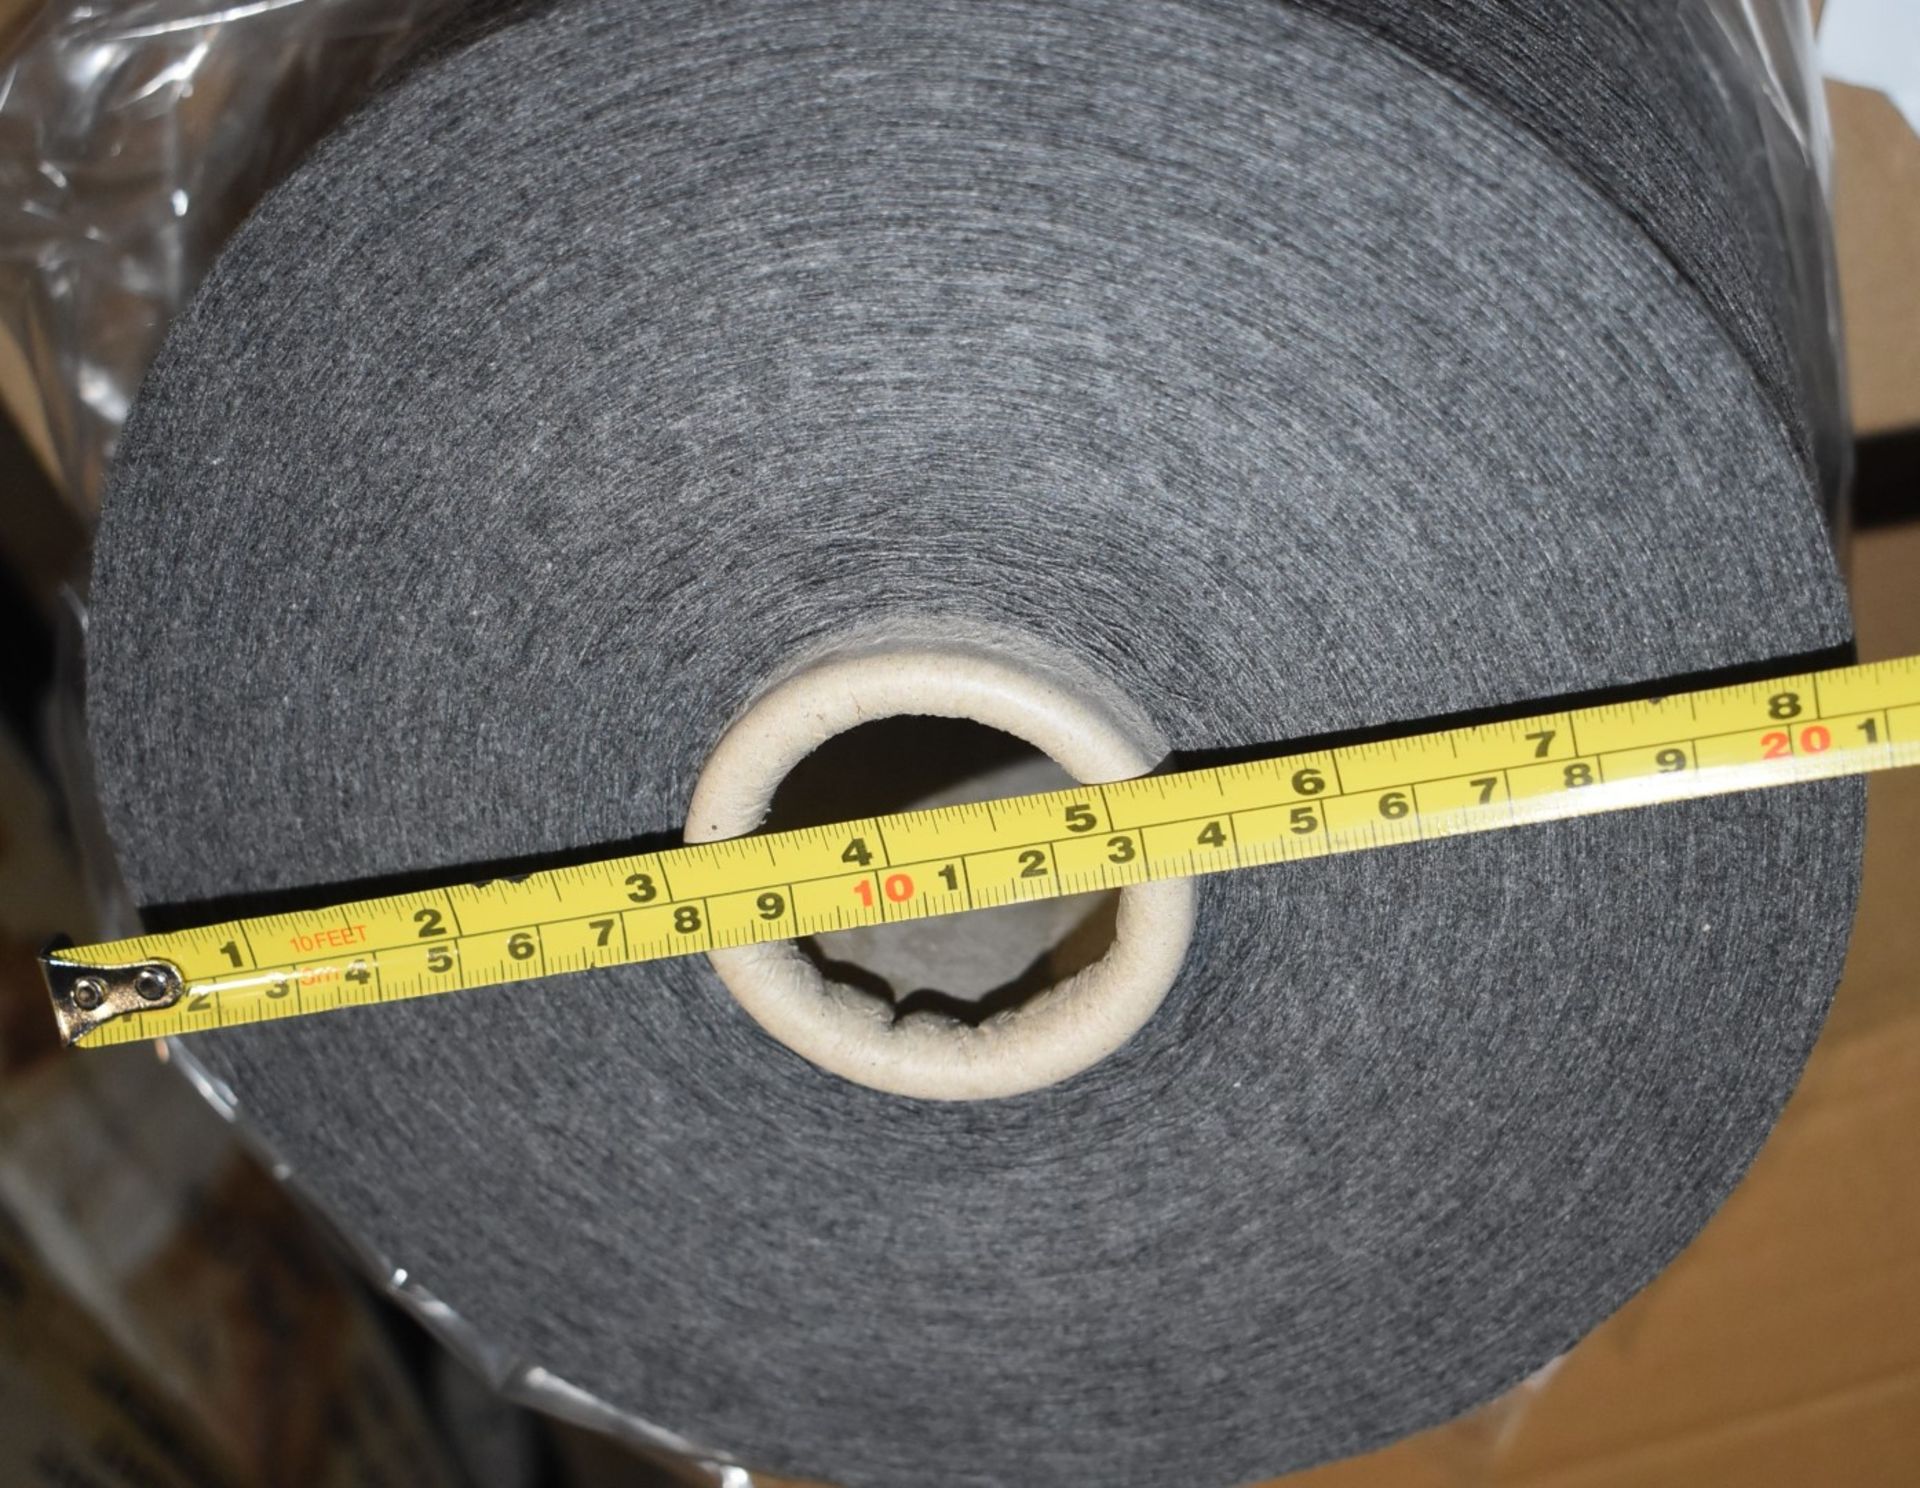 10 x Cones of 1/13 MicroCotton Knitting Yarn - Mid Grey - Approx Weight: 2,500g - New Stock ABL Yarn - Image 12 of 17